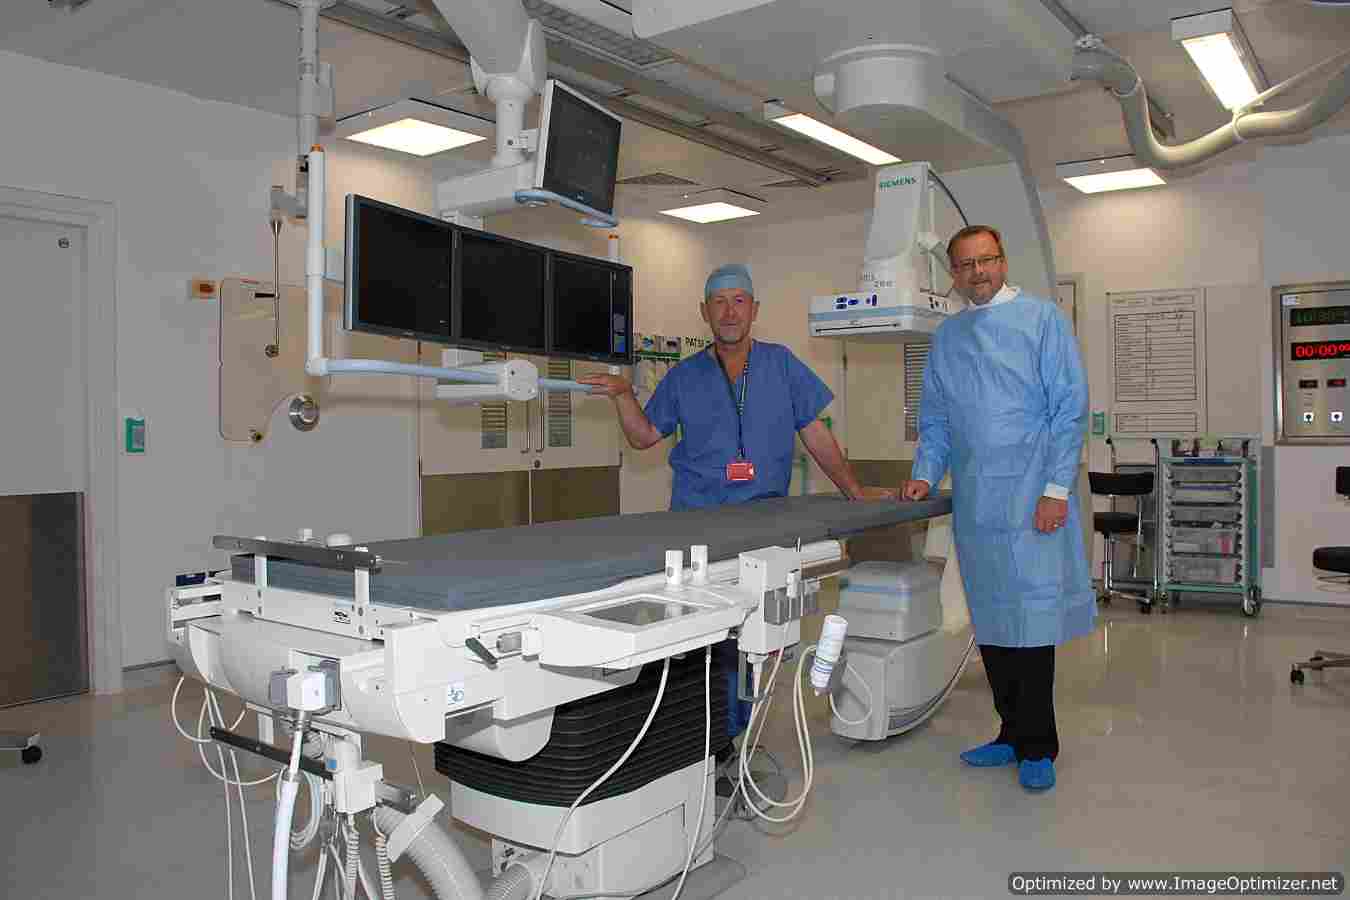 FEATURE: Operation hybrid: designing modern operating theatres